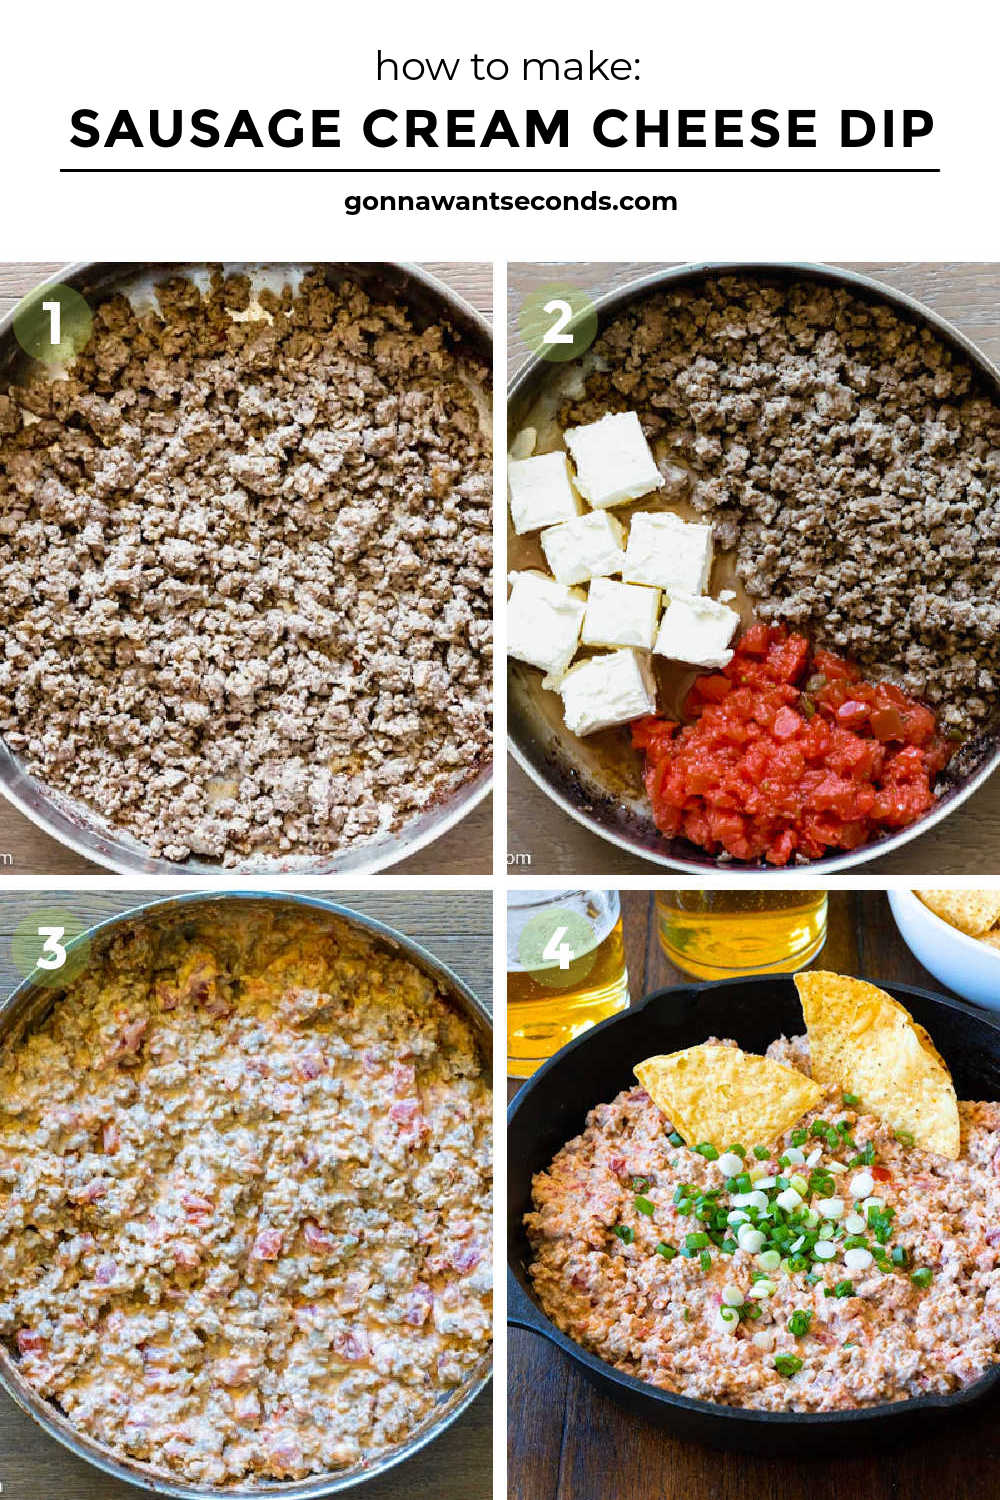 Step by step how to make How to make Sausage Cream Cheese Dip